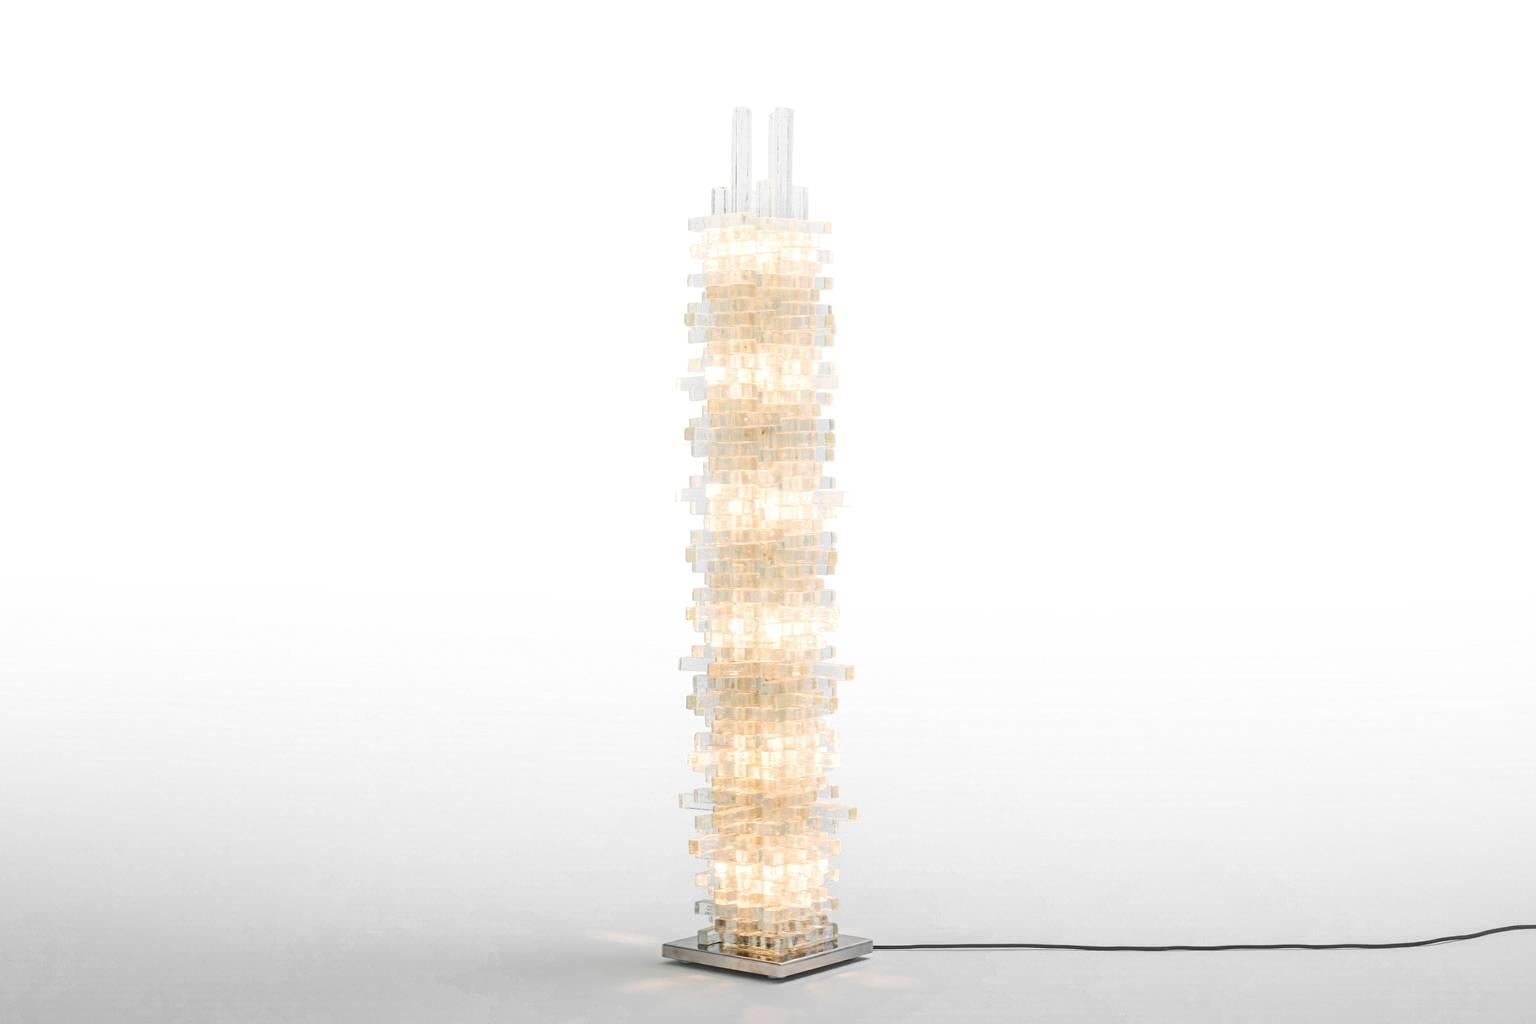 Exceptional floor lamp by Poliarte, Italy, 1960s. Made from stacked Murano glass rods all handcrafted with each their own unique structure. The lamp stands on a polished stainless steel base. Provided with six E14 light fittings for a balanced